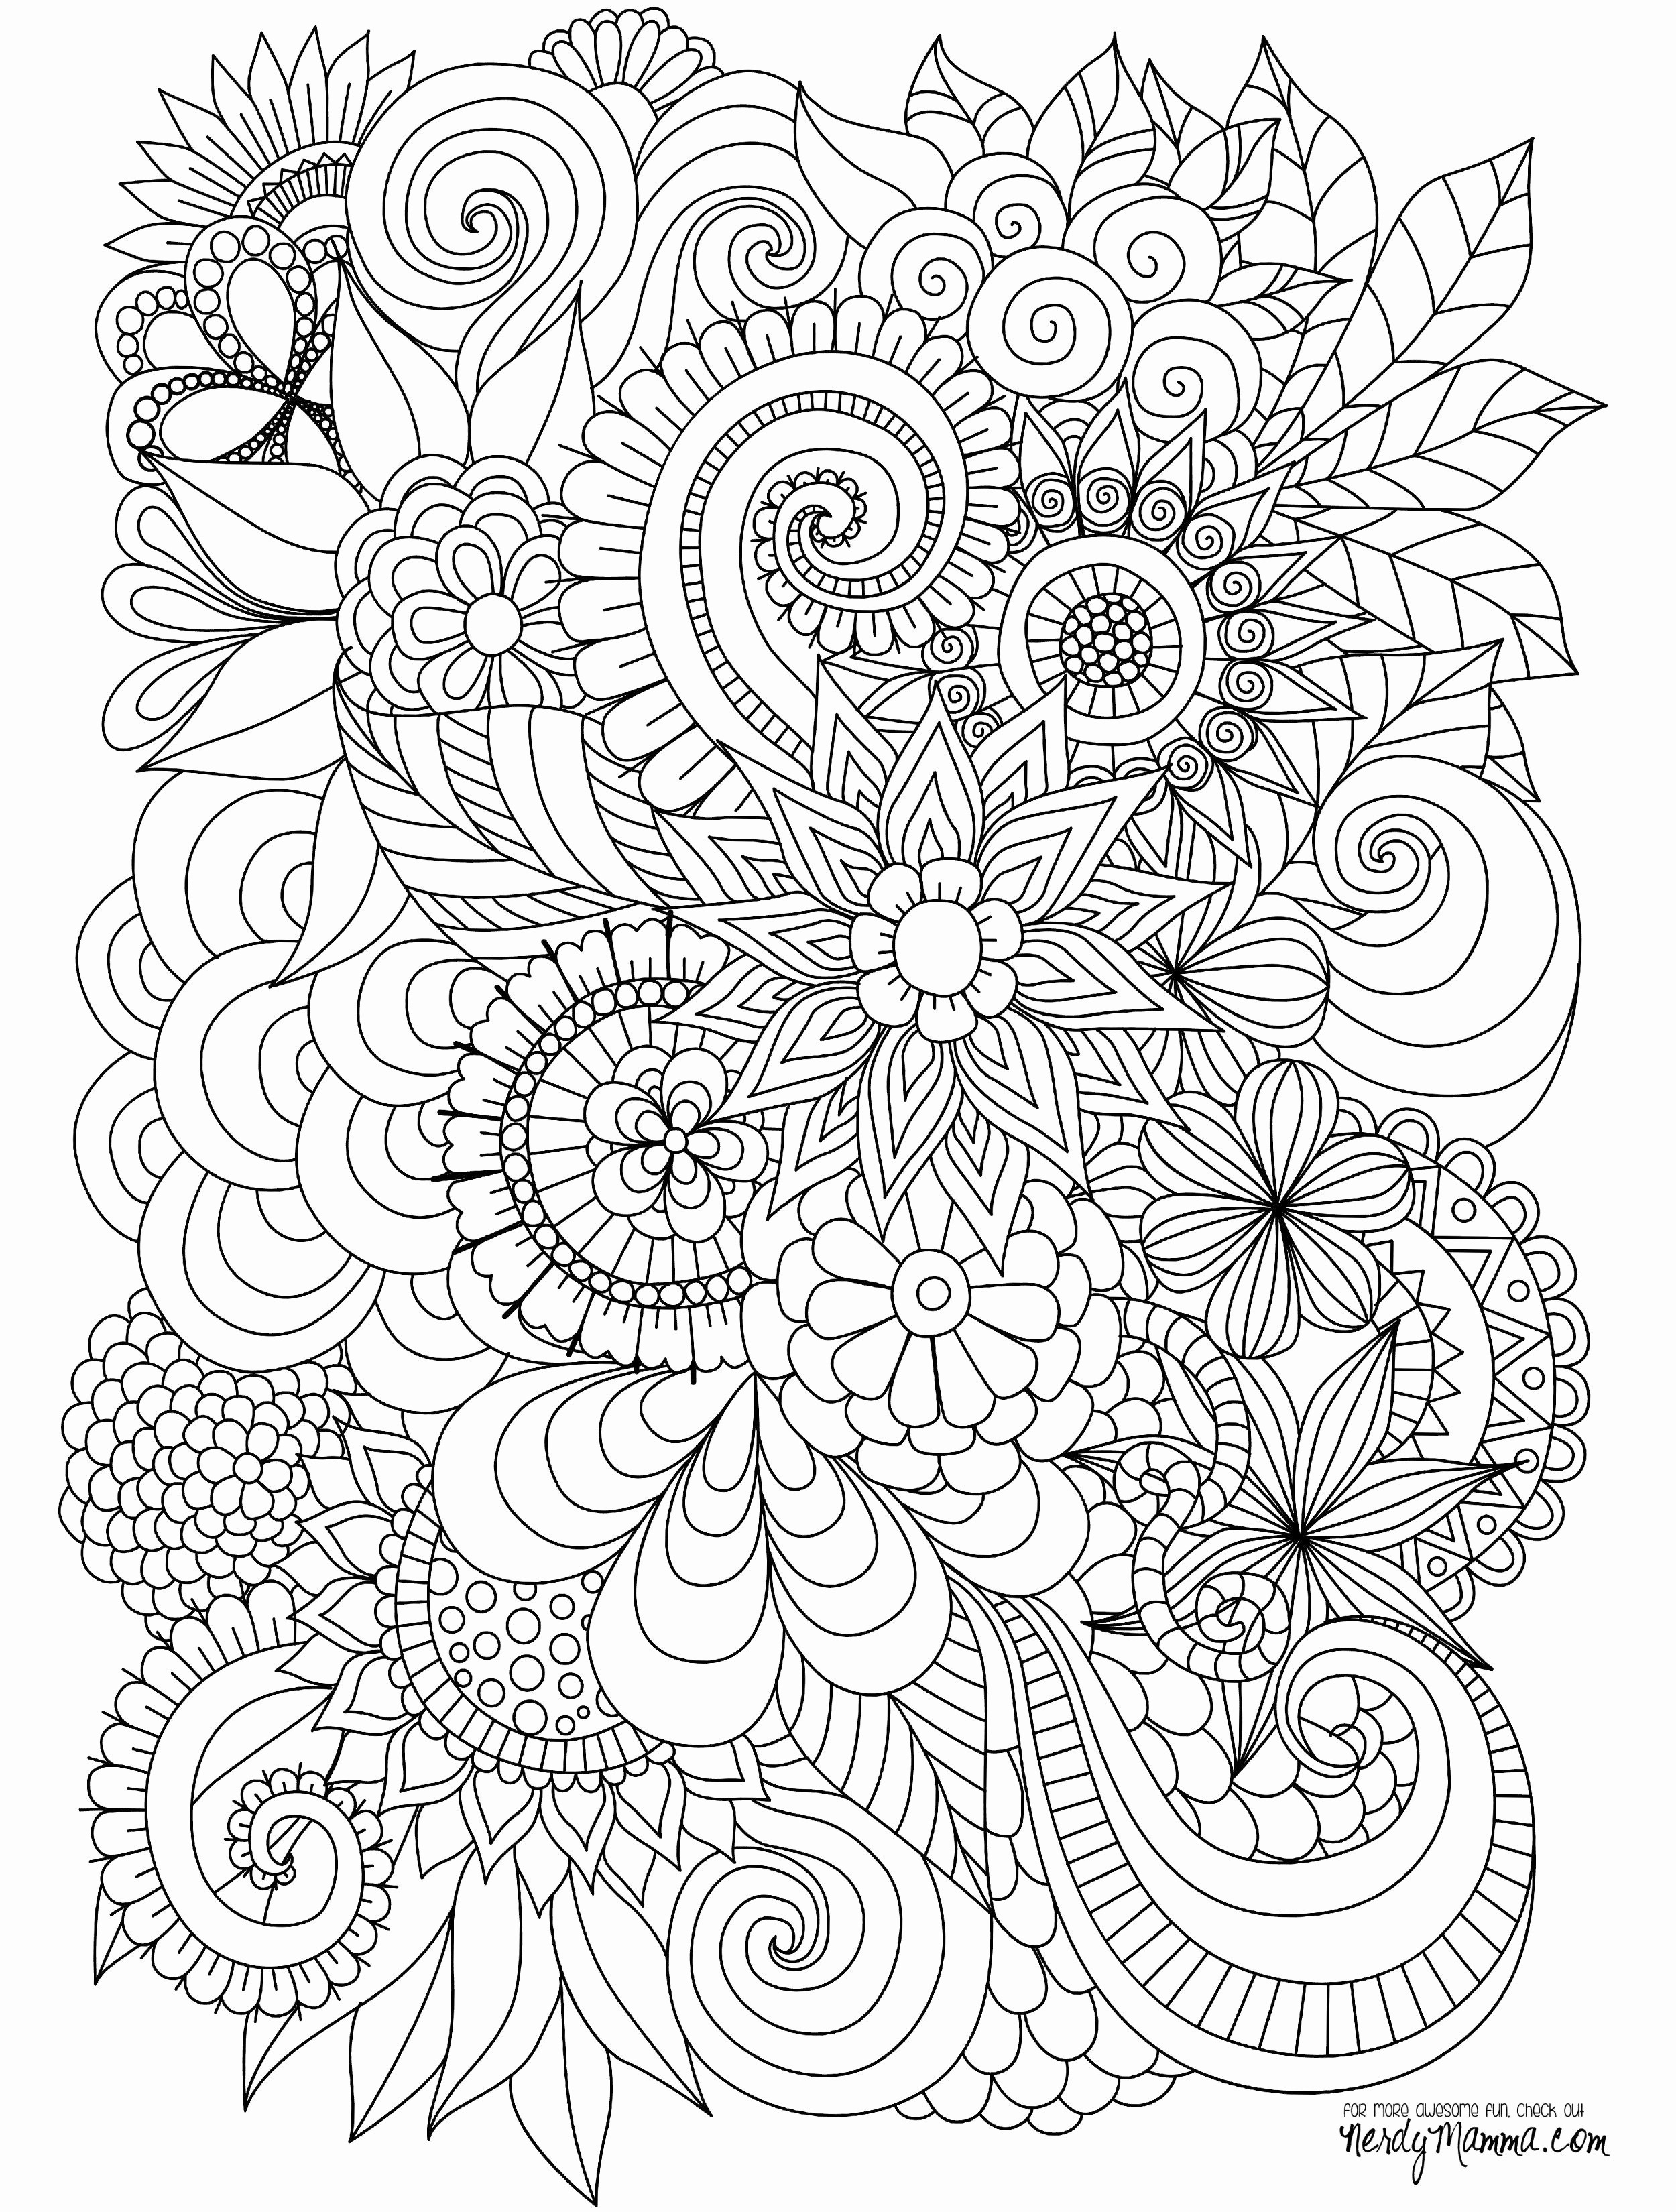 Coloring Page Turkey Wallpaper